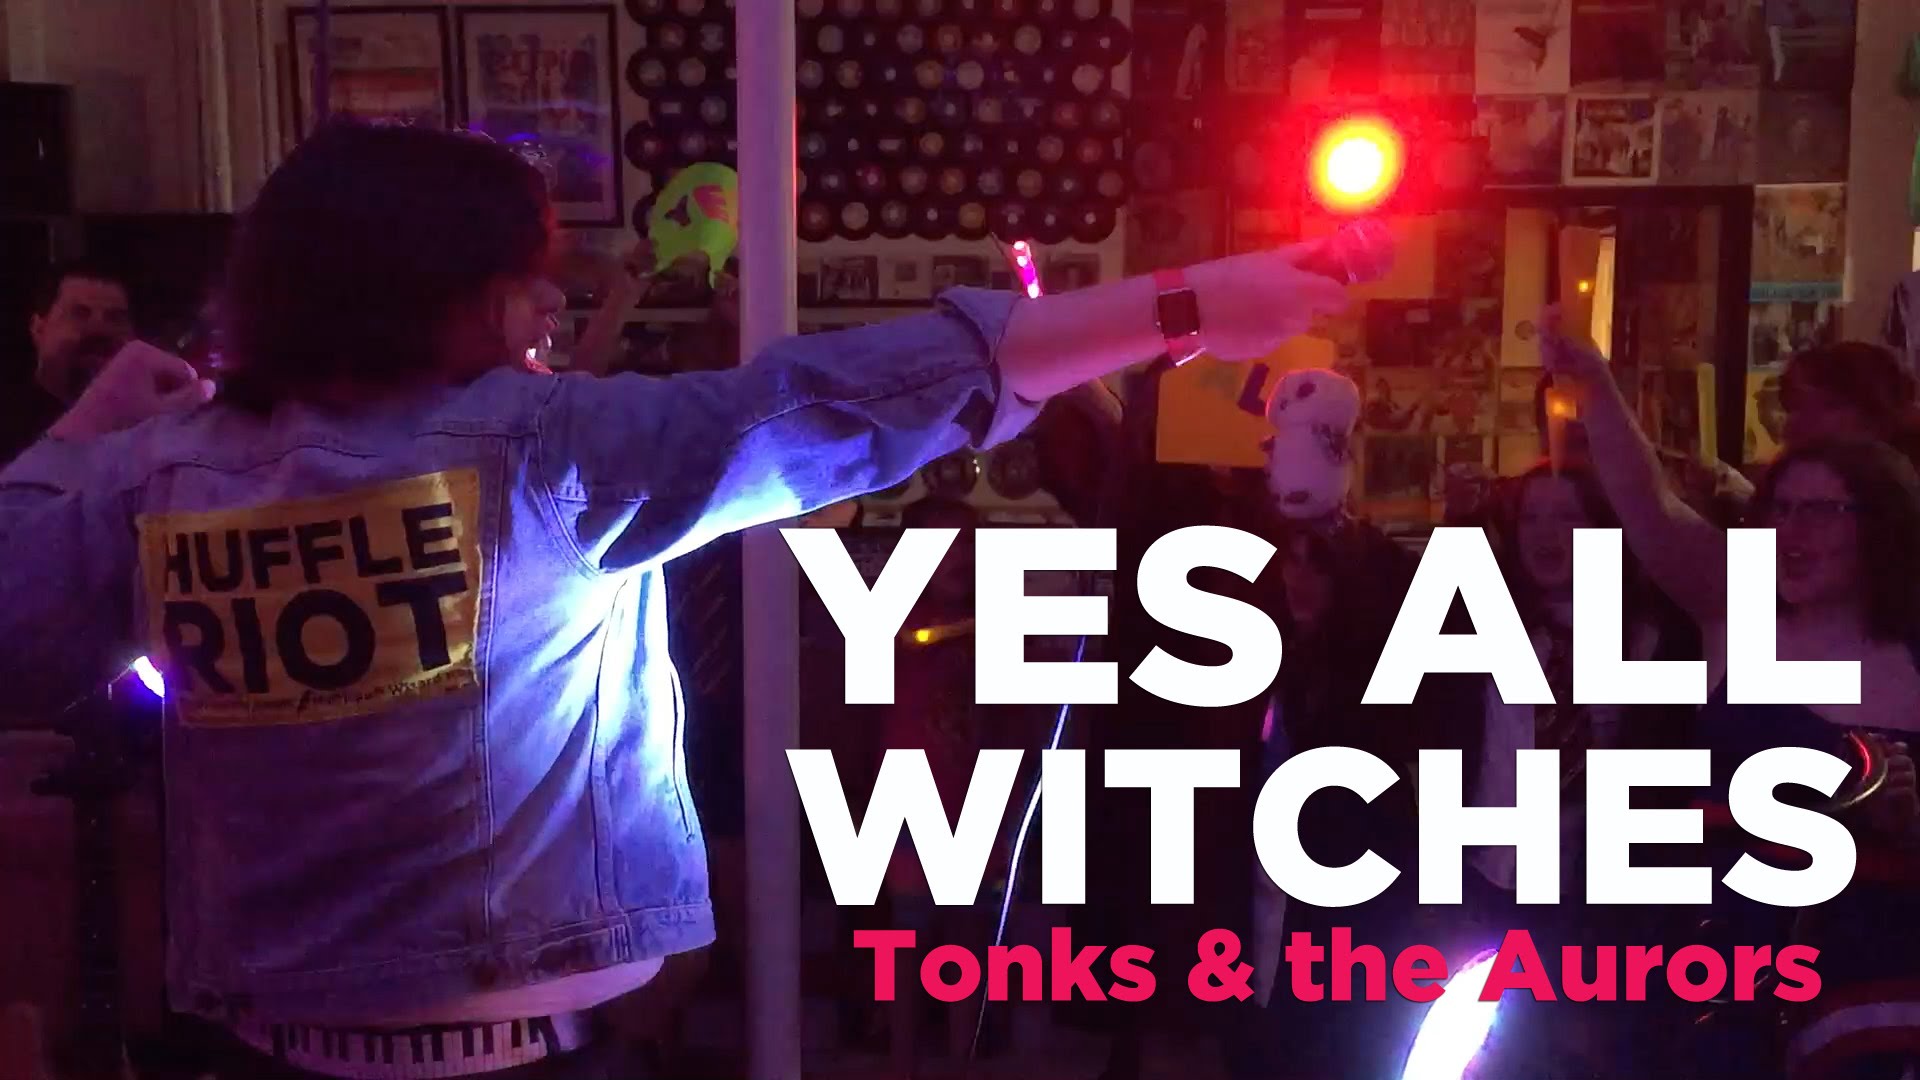 tonks-and-the-aurors-yes-all-witches